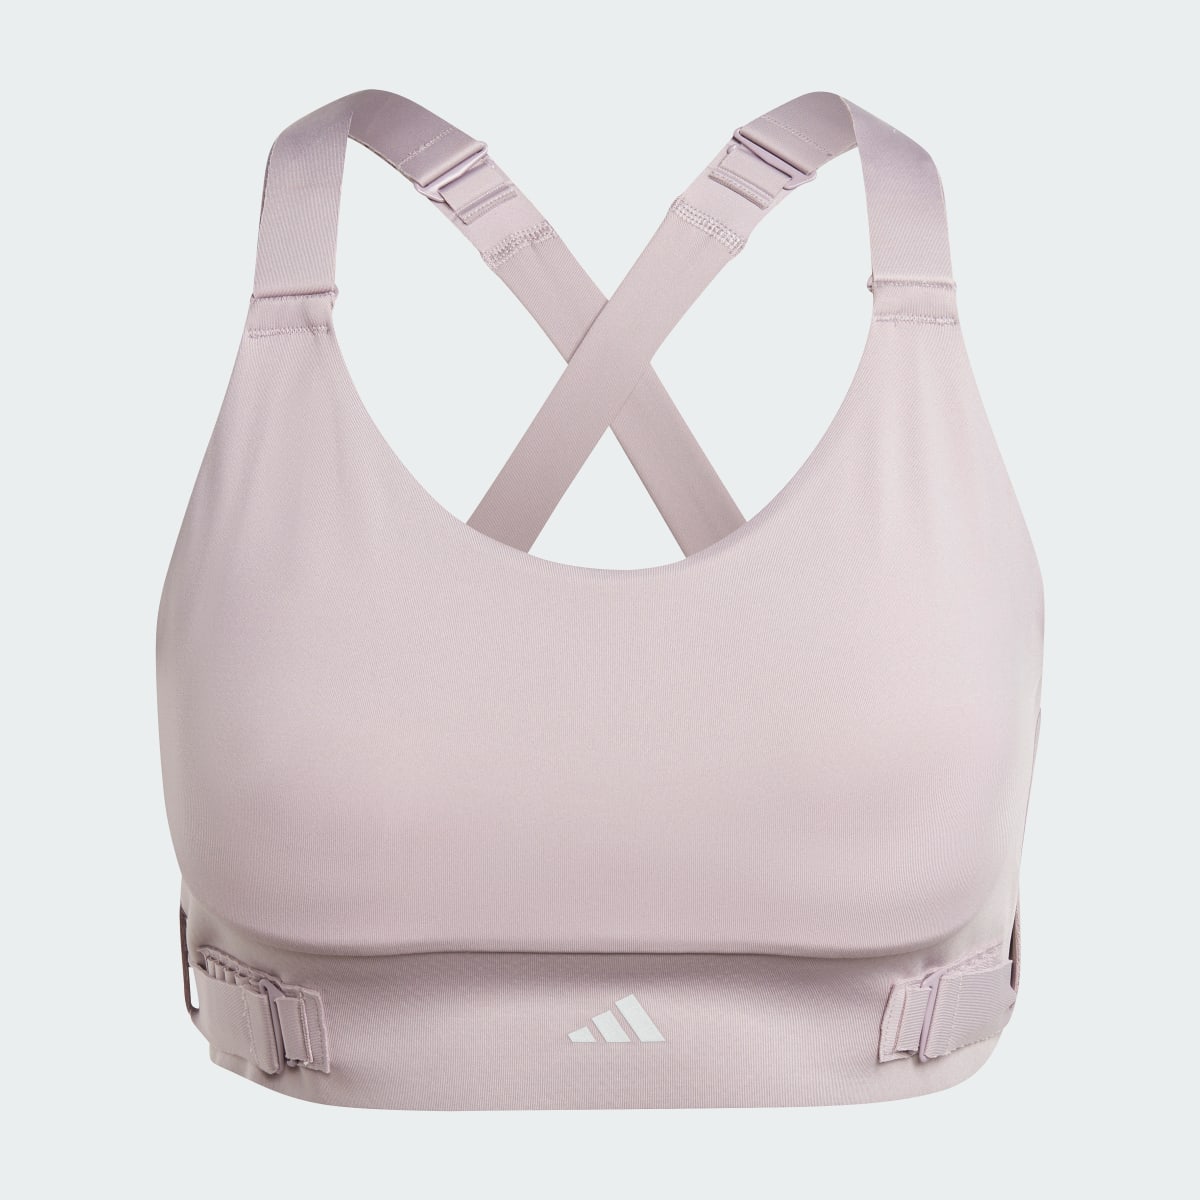 Adidas Brassière FastImpact Luxe Run Maintien fort. 5